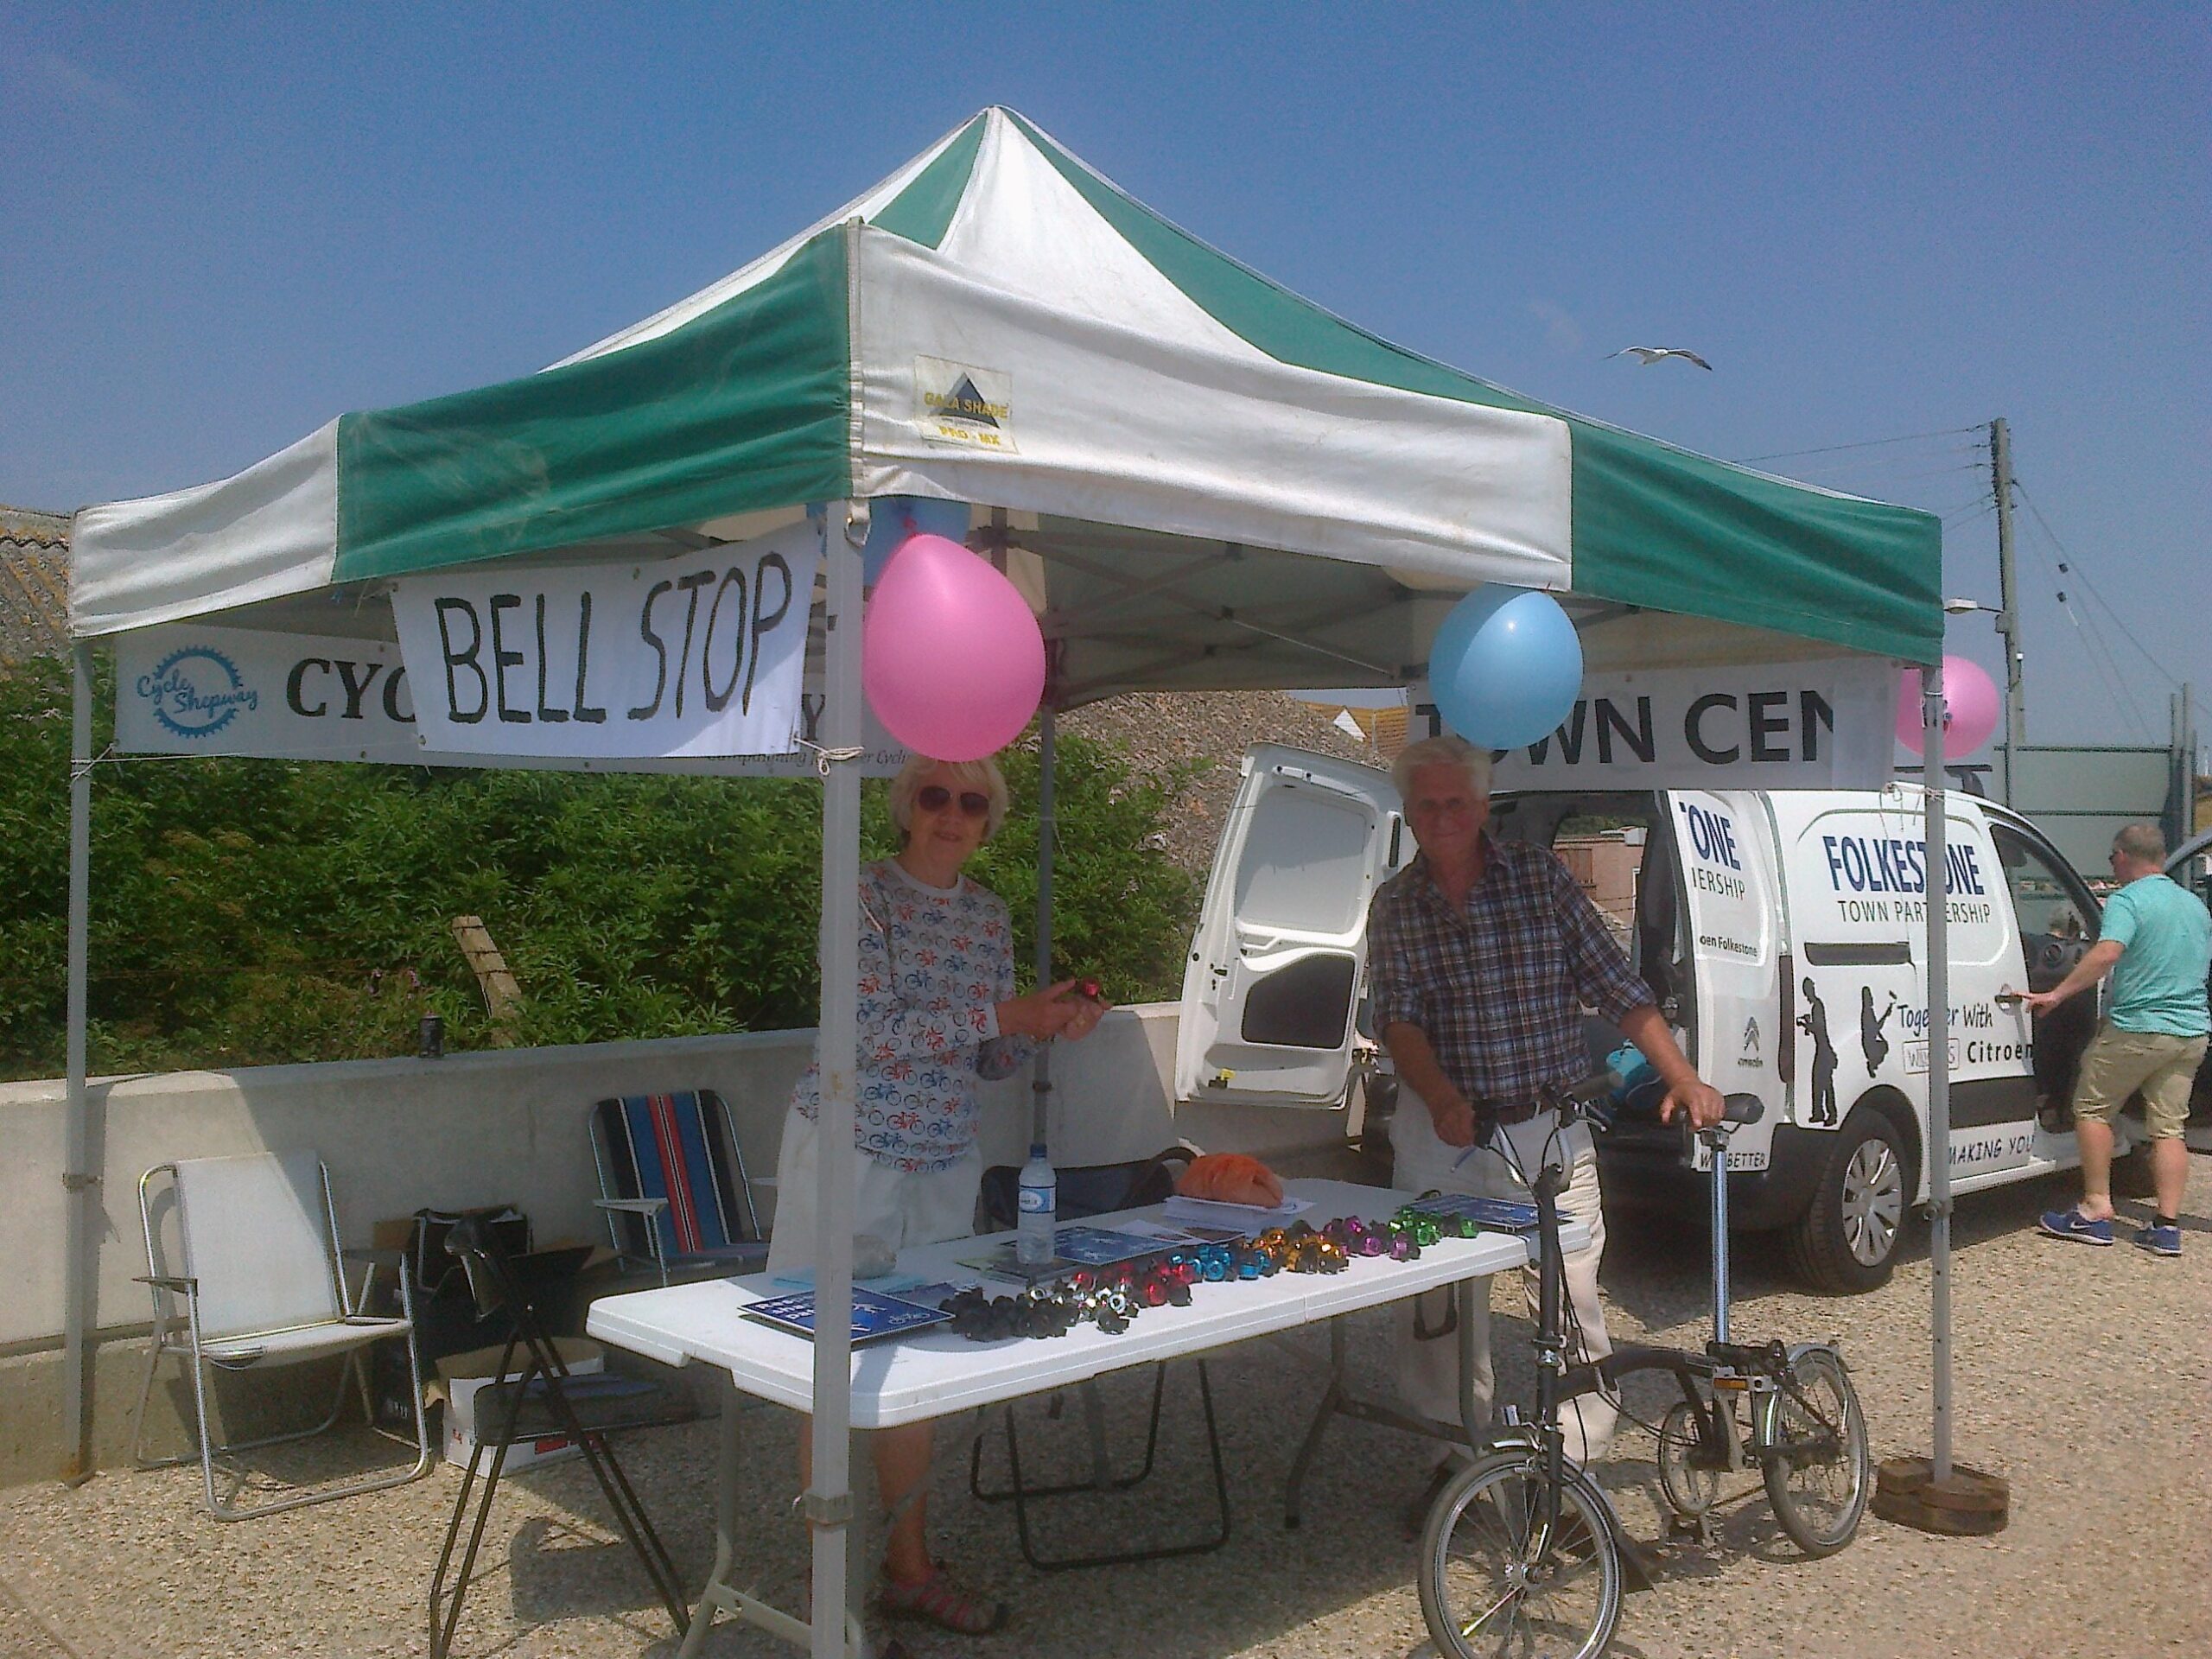 Rhona Hodges & David Taylor at the 'Bell-Stop' Campaign Sandgate Festival